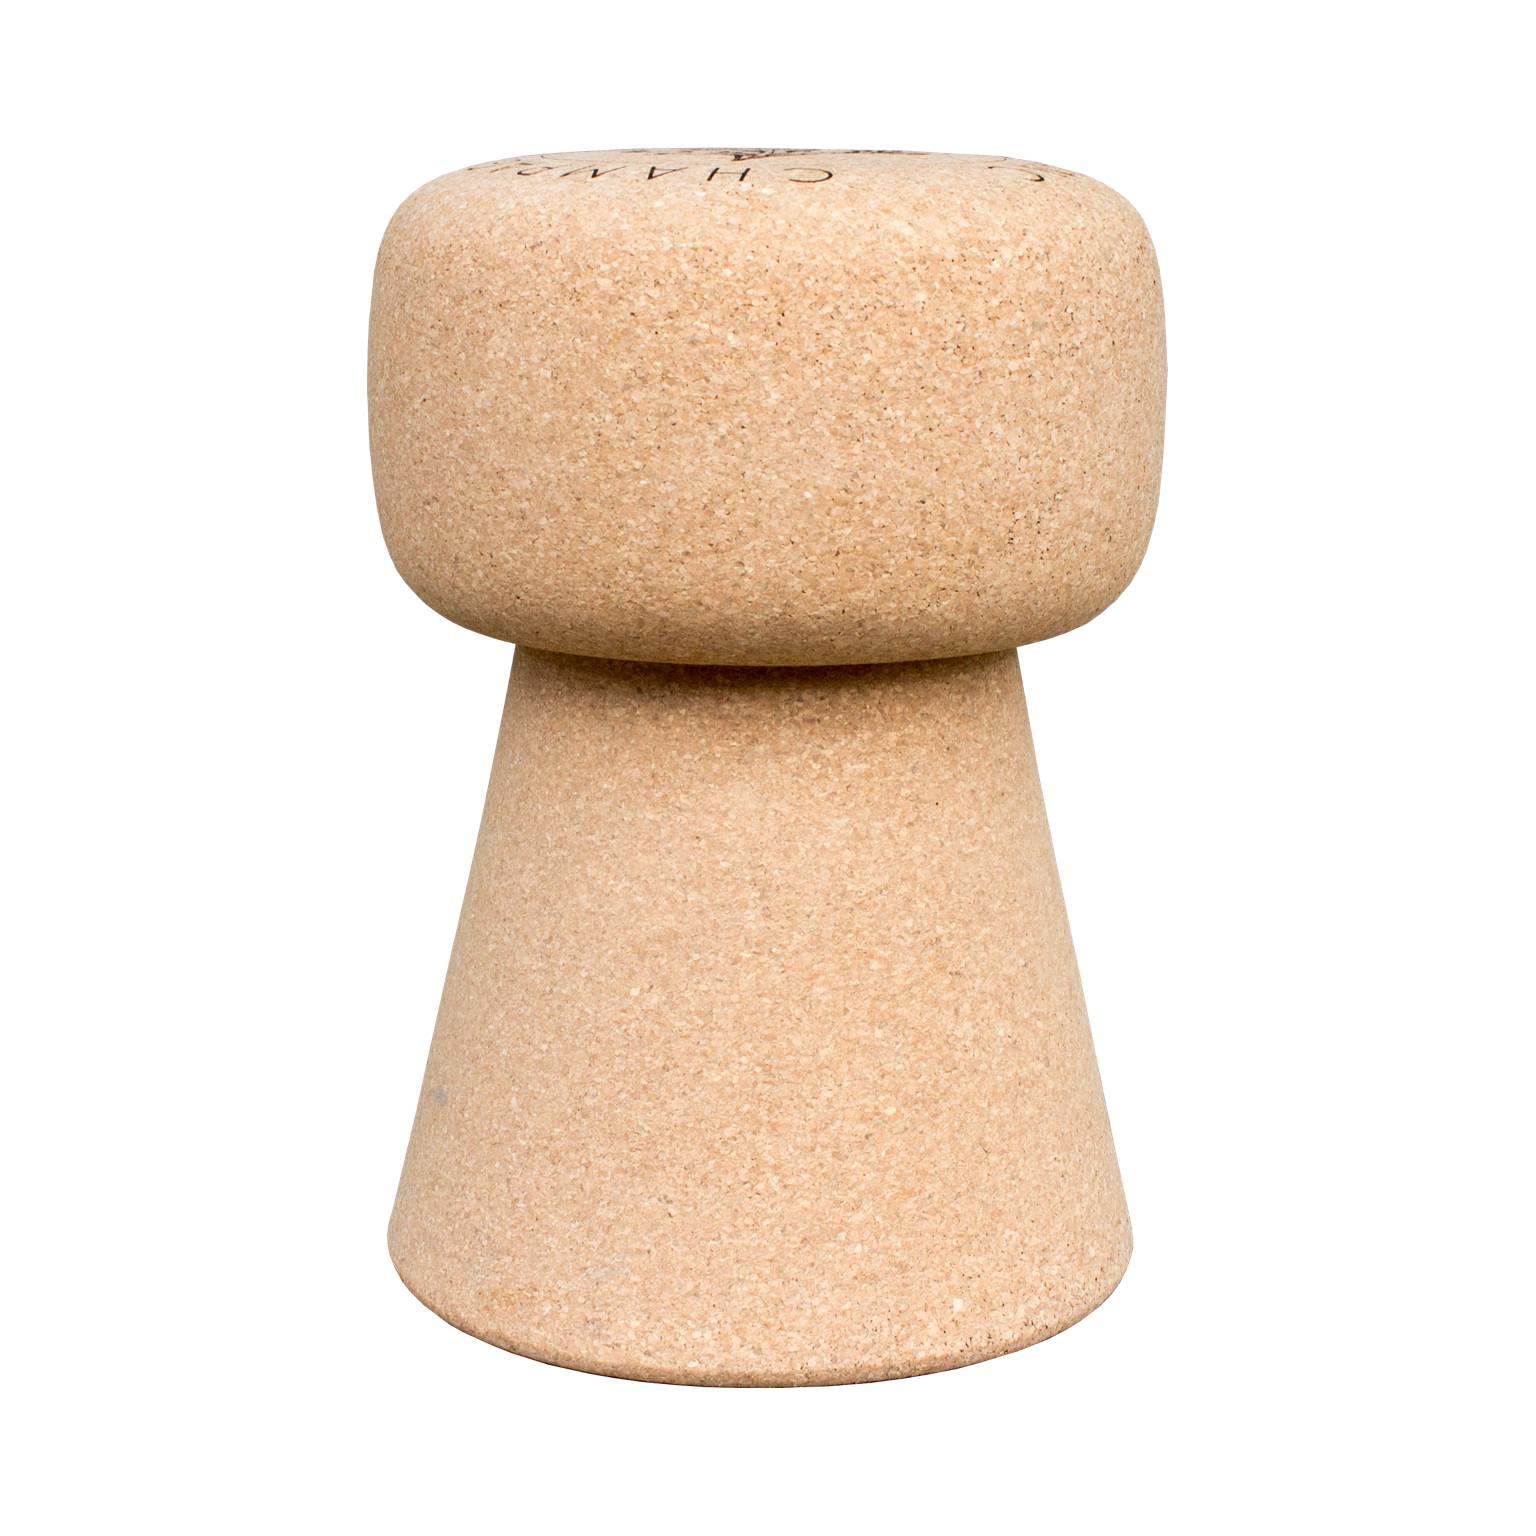 Crafted of real vintage cork from Portugal, this cork stool is shaped exactly like a champagne cork stopper. Everyone can use an extra stool in the house and lovely also as a small side or drinks table. Especially at less than two feet high, it